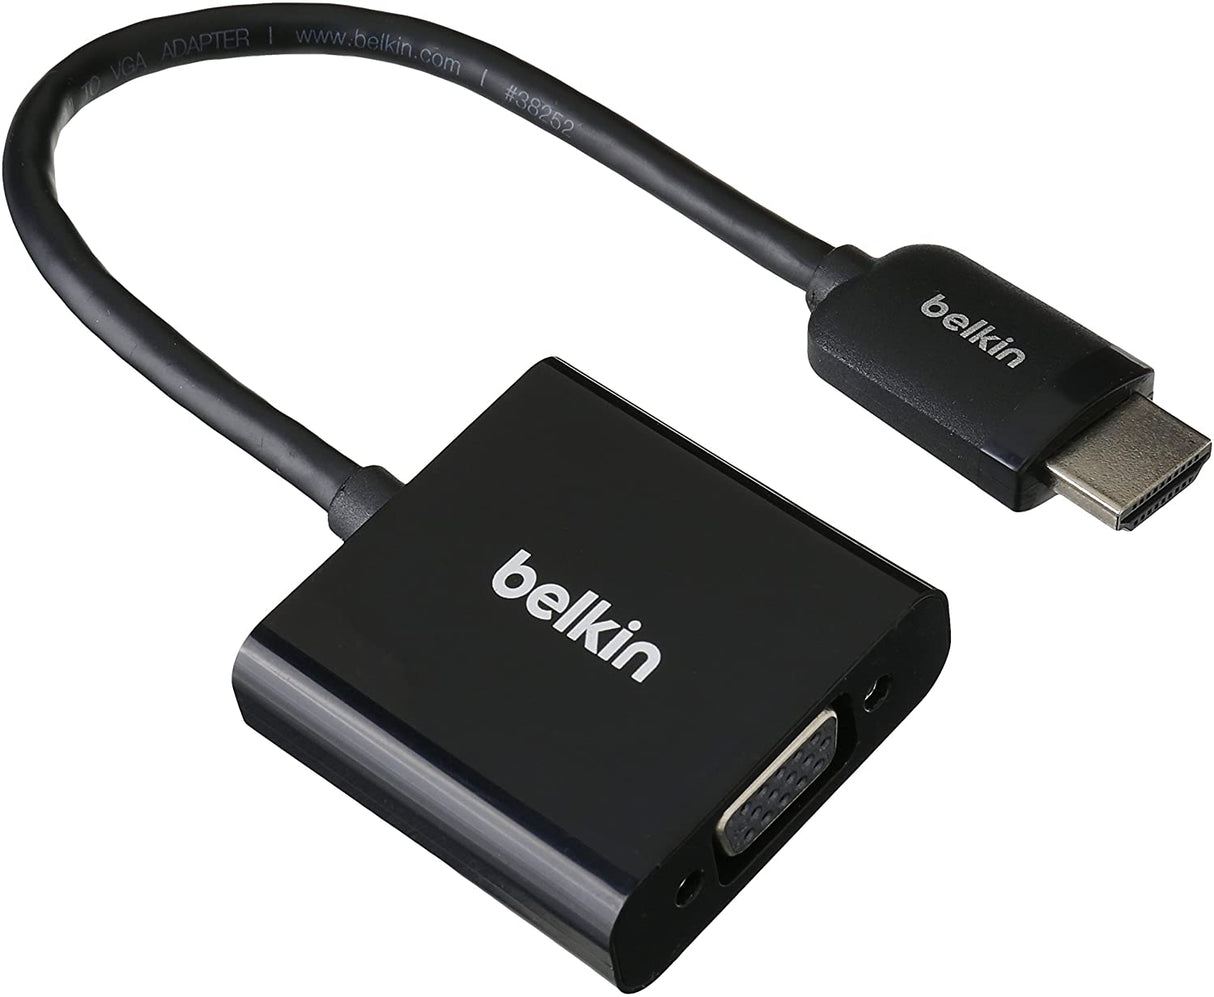 Belkin HDMI to VGA Adapter Dongle with 3.5mm Audio Jack for Portable Devices